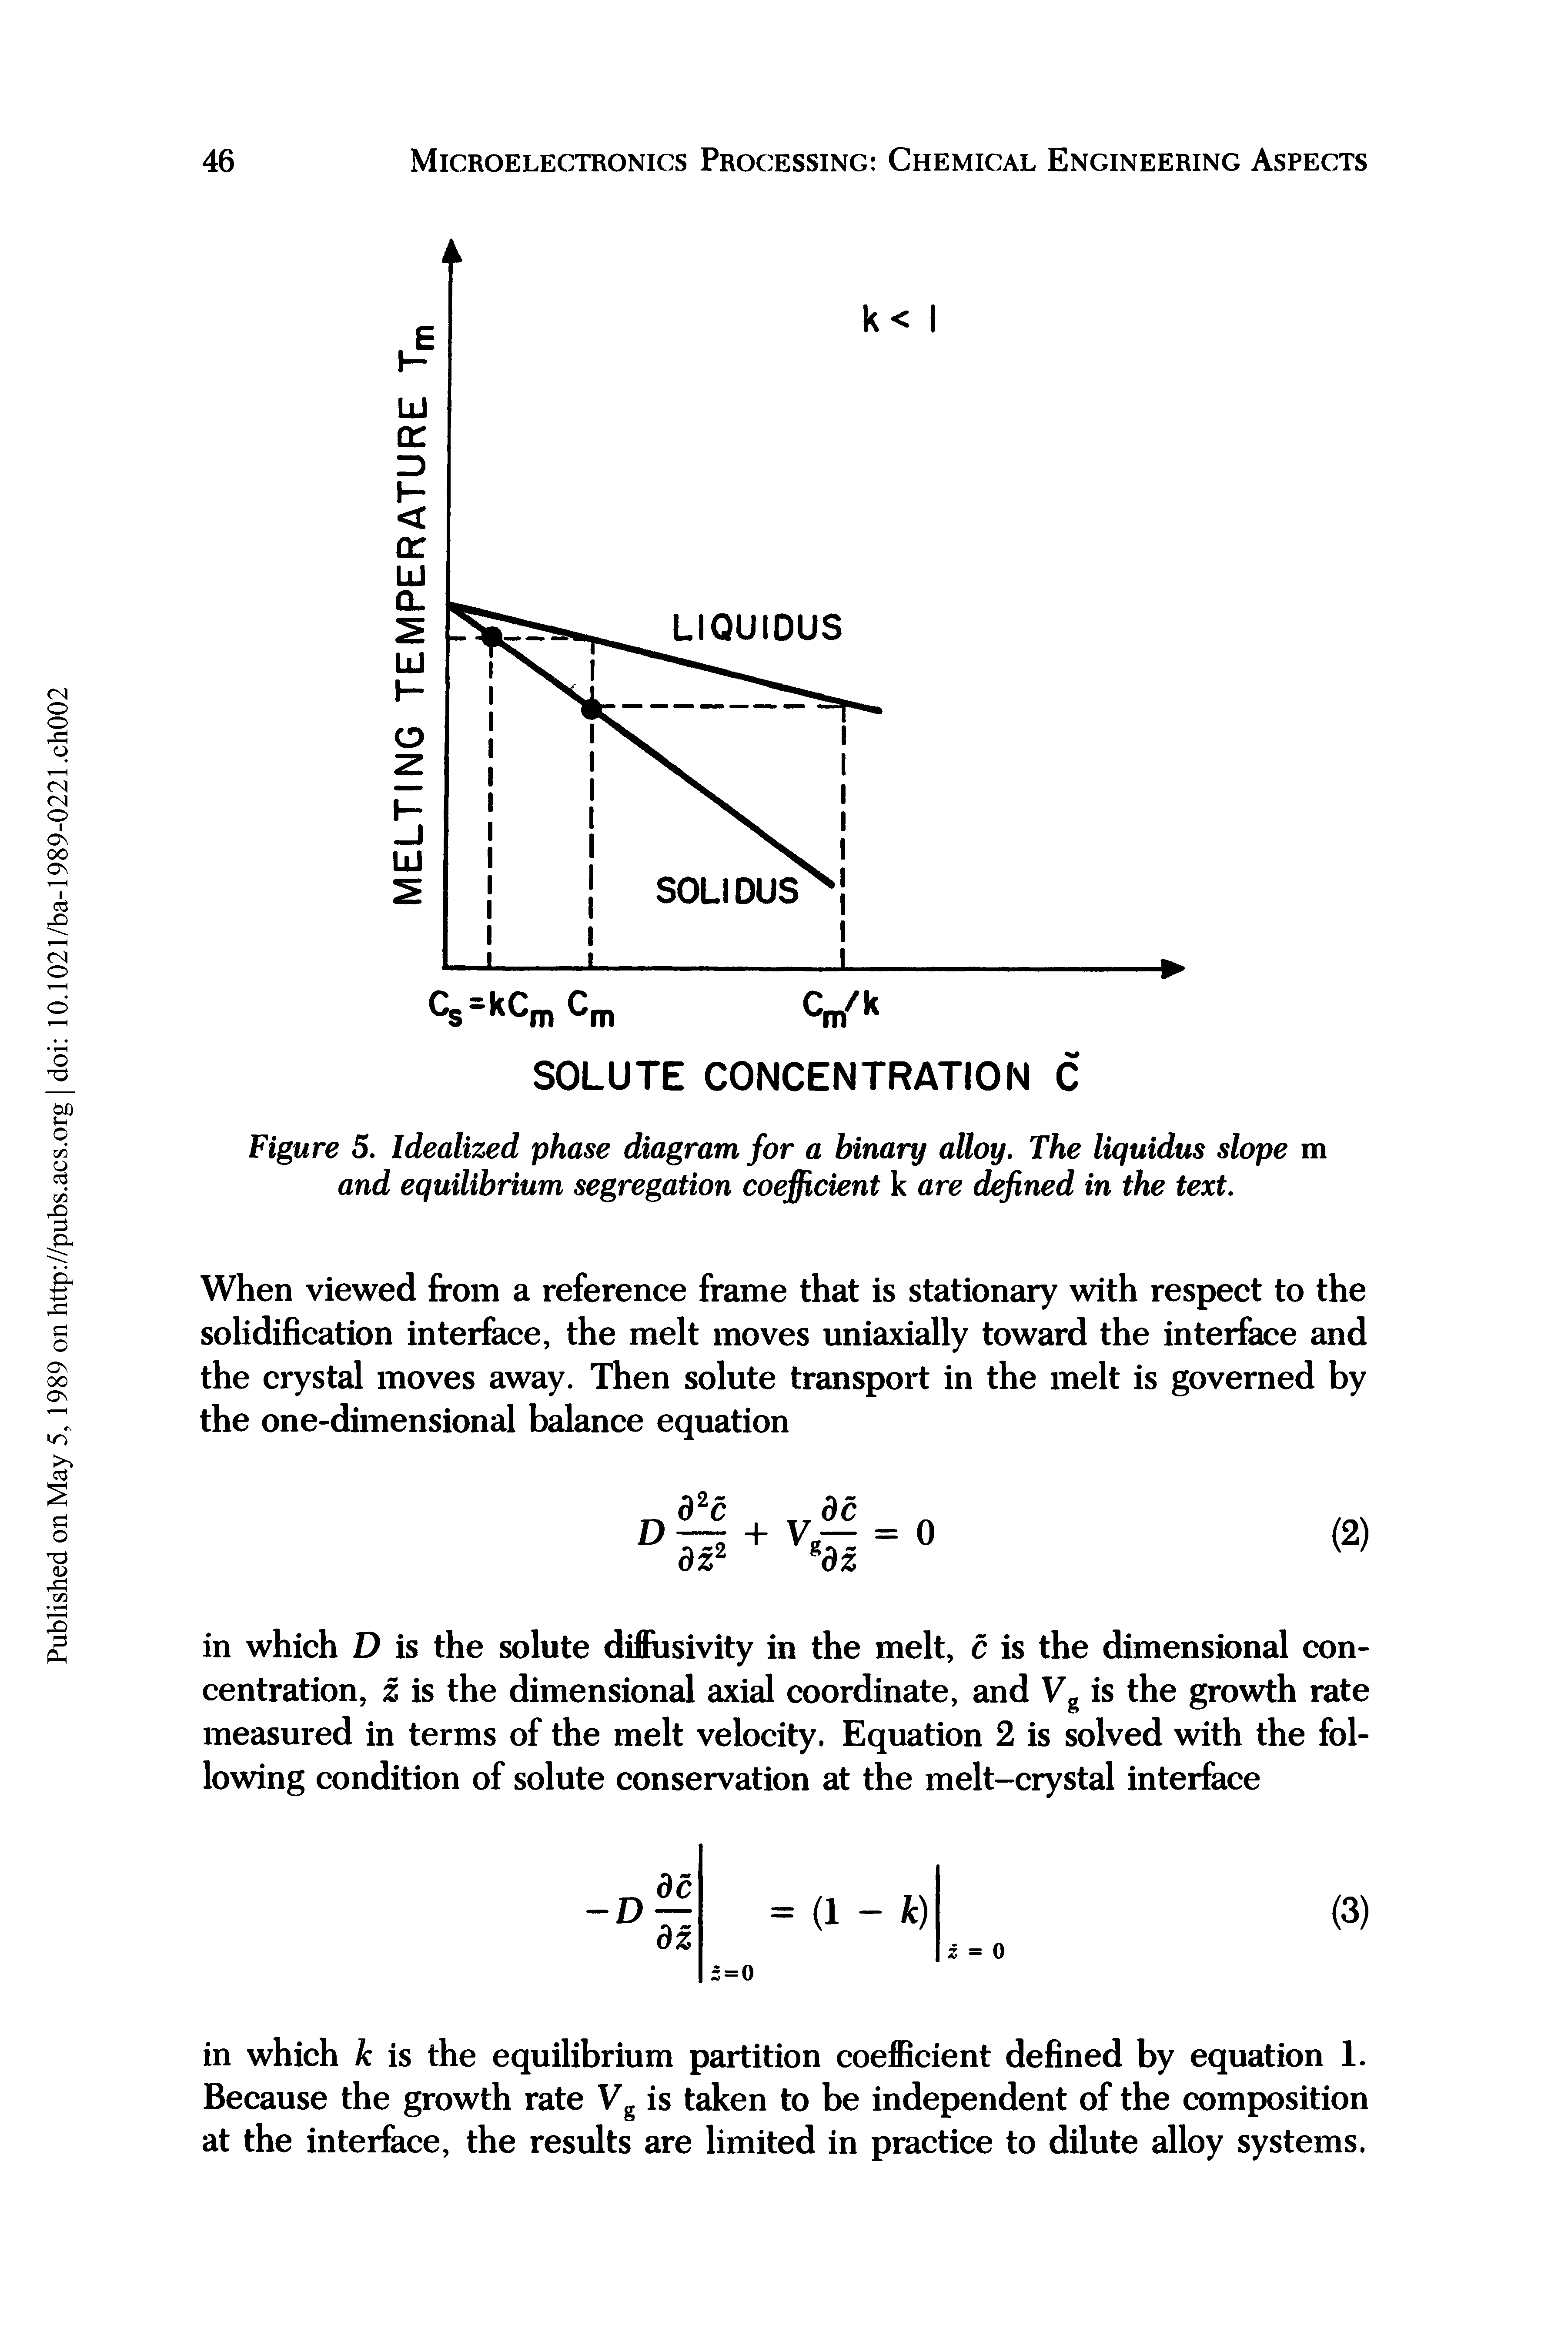 Figure 5. Idealized phase diagram for a binary alloy. The liquidus slope m and equilibrium segregation coefficient k are defined in the text.